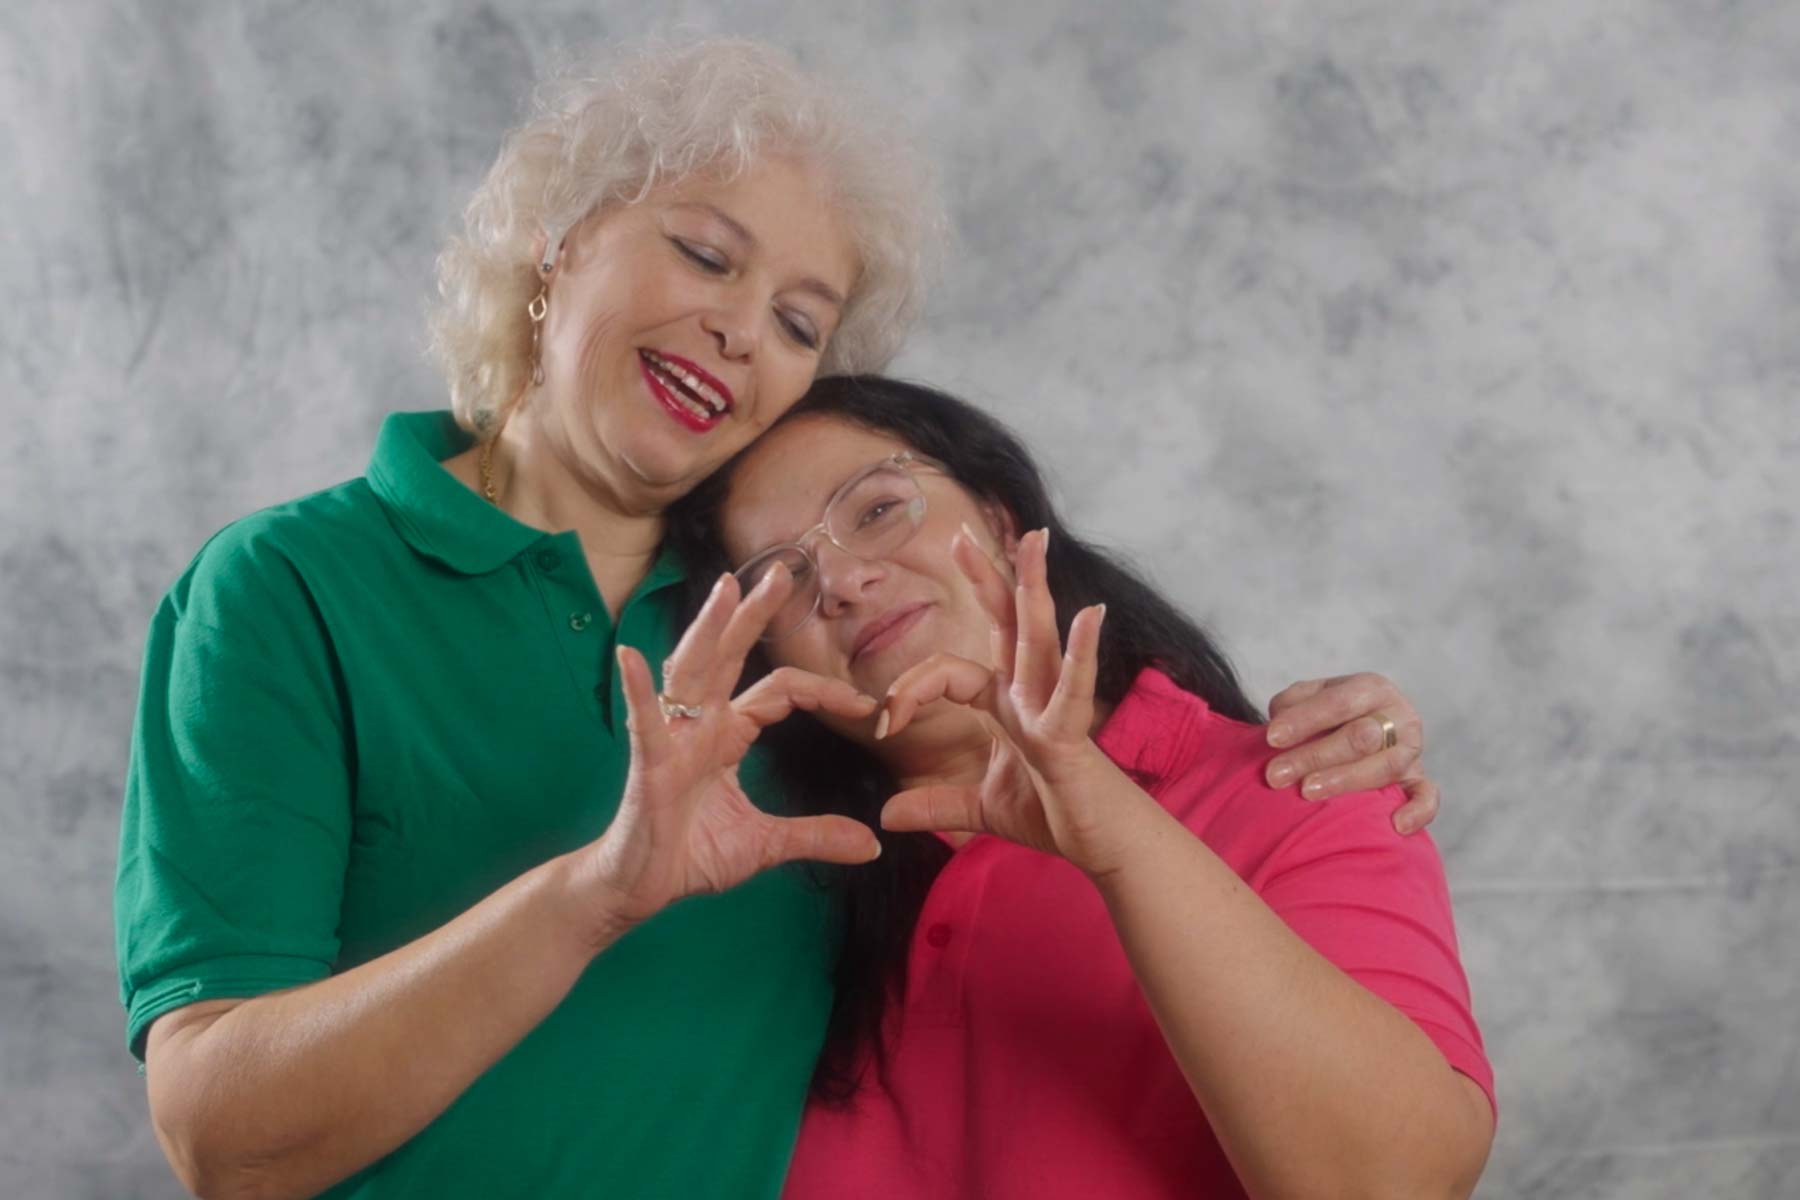 Two women hug and make a heart shape with their hands